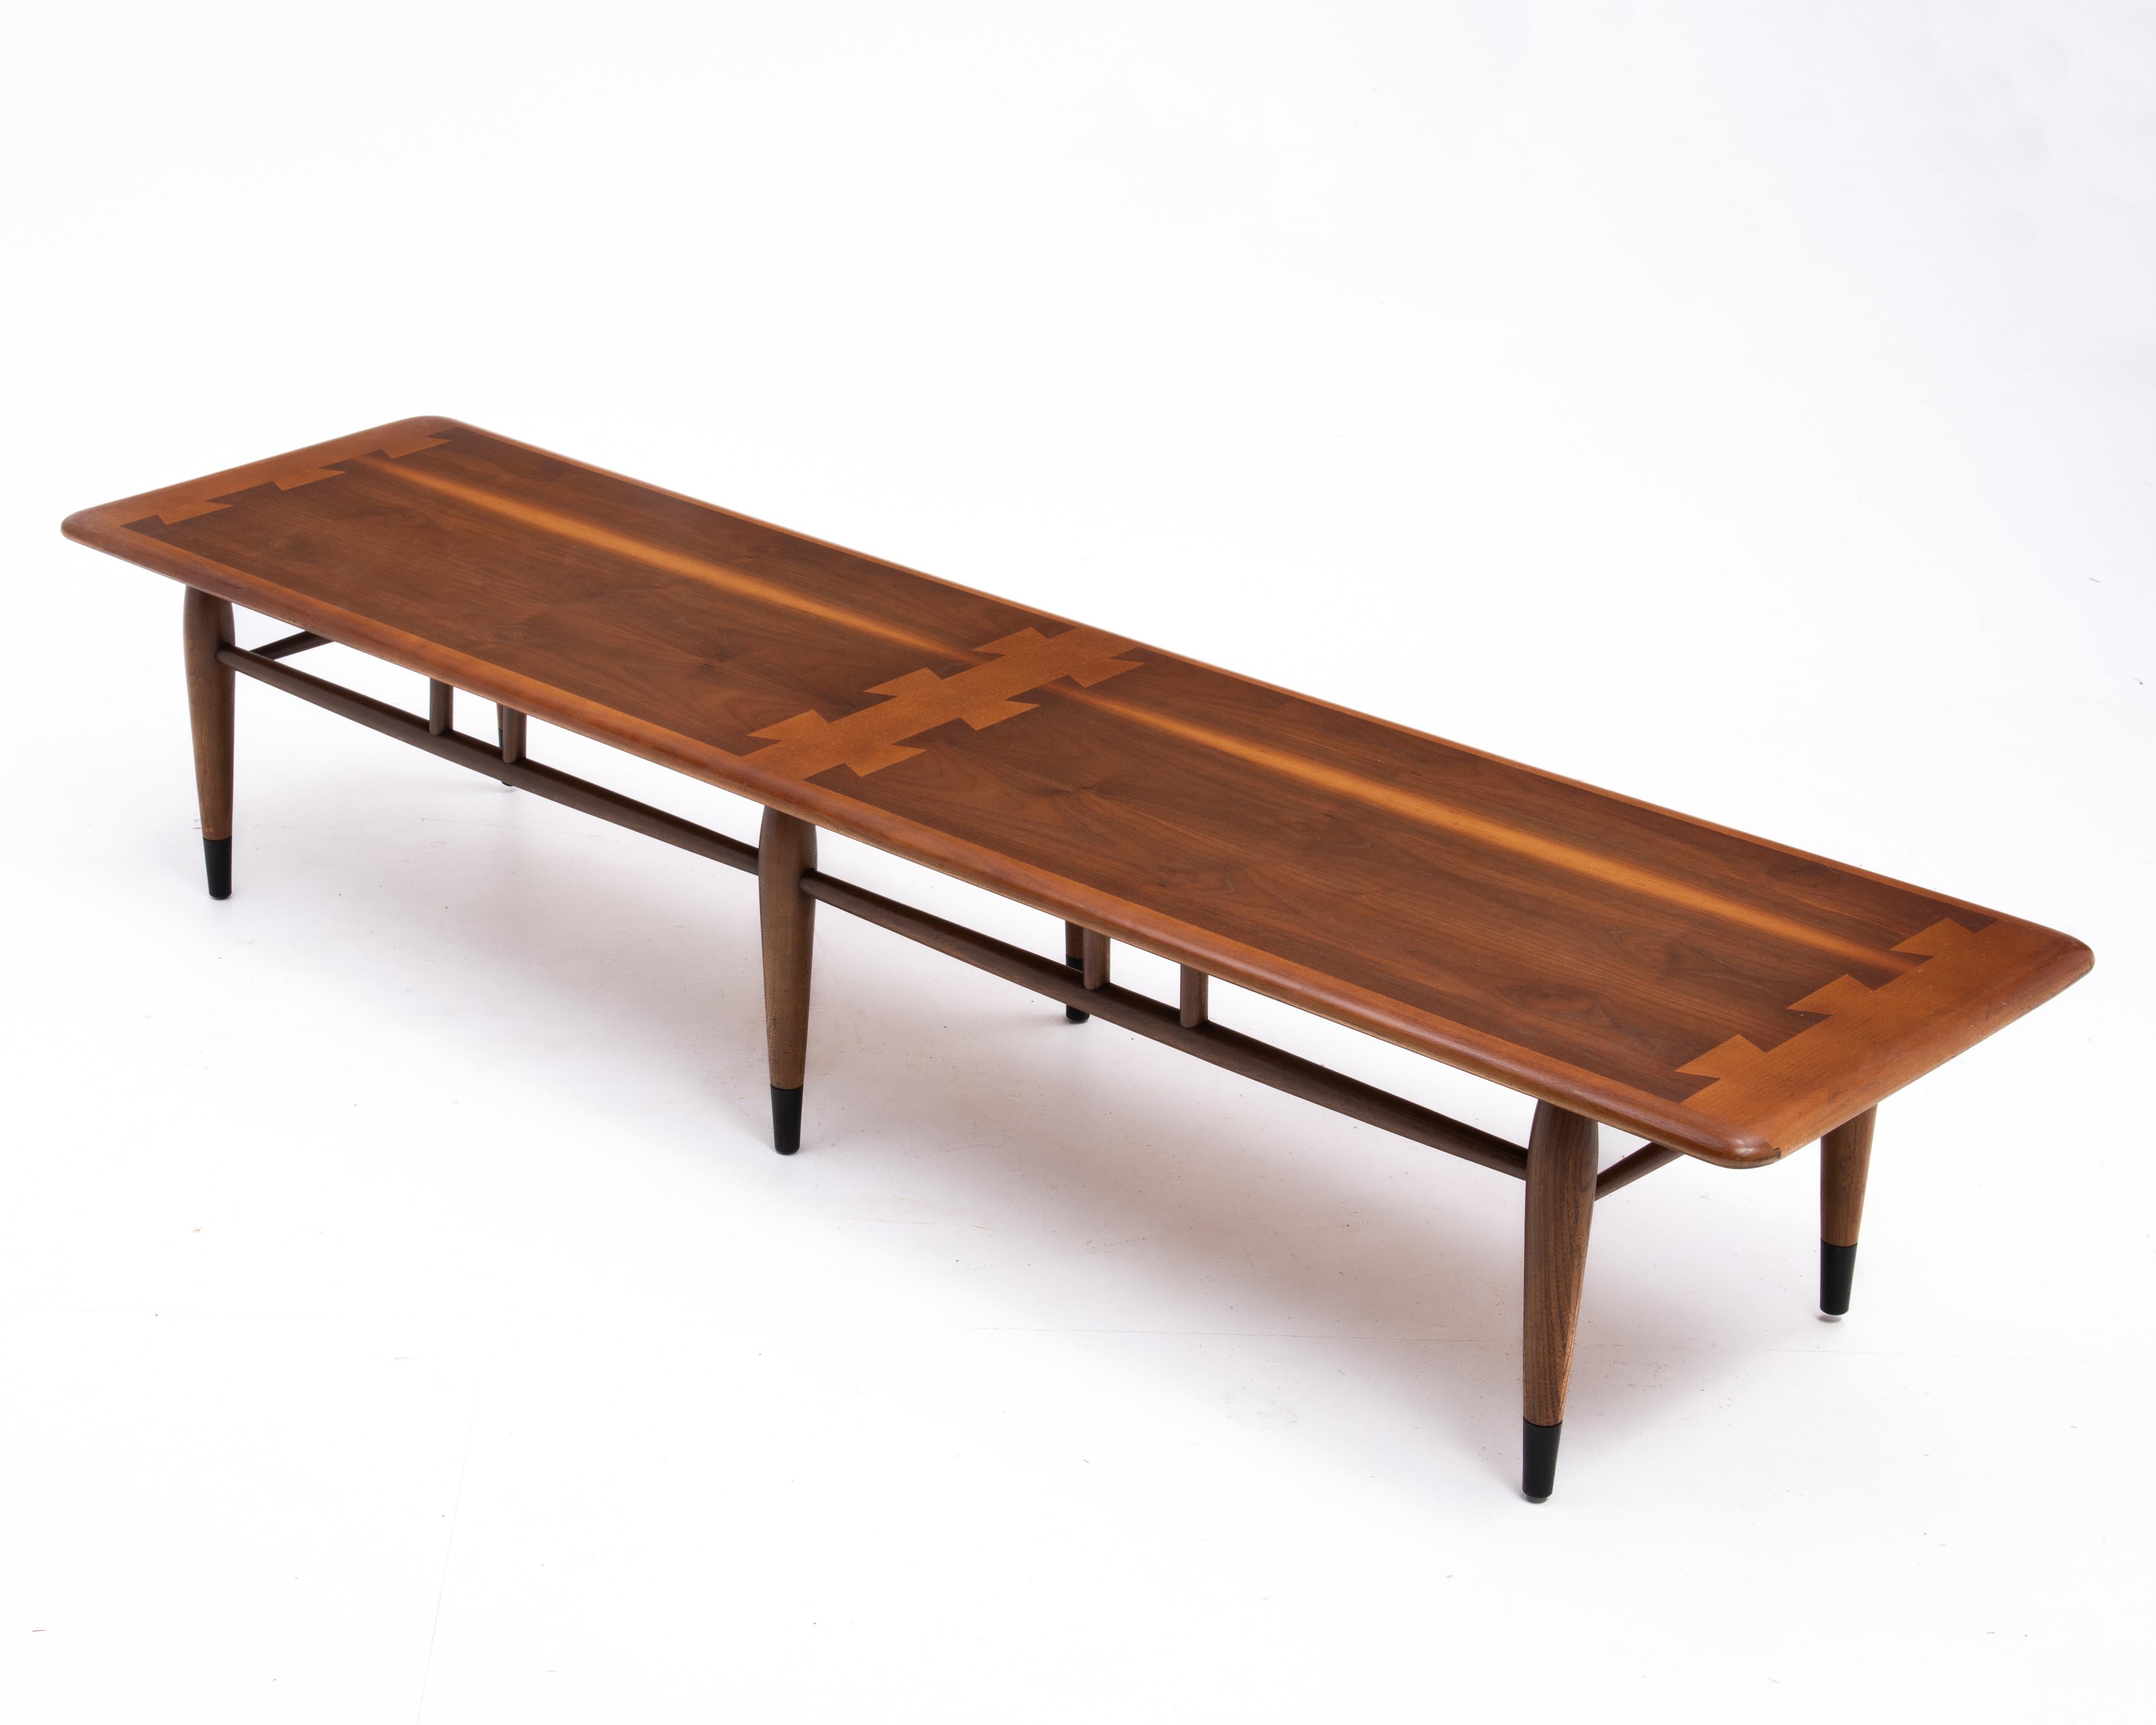 American Mid-Century Modern Lane Acclaim Walnut Coffee Table Andre Bus Style 900 09 For Sale